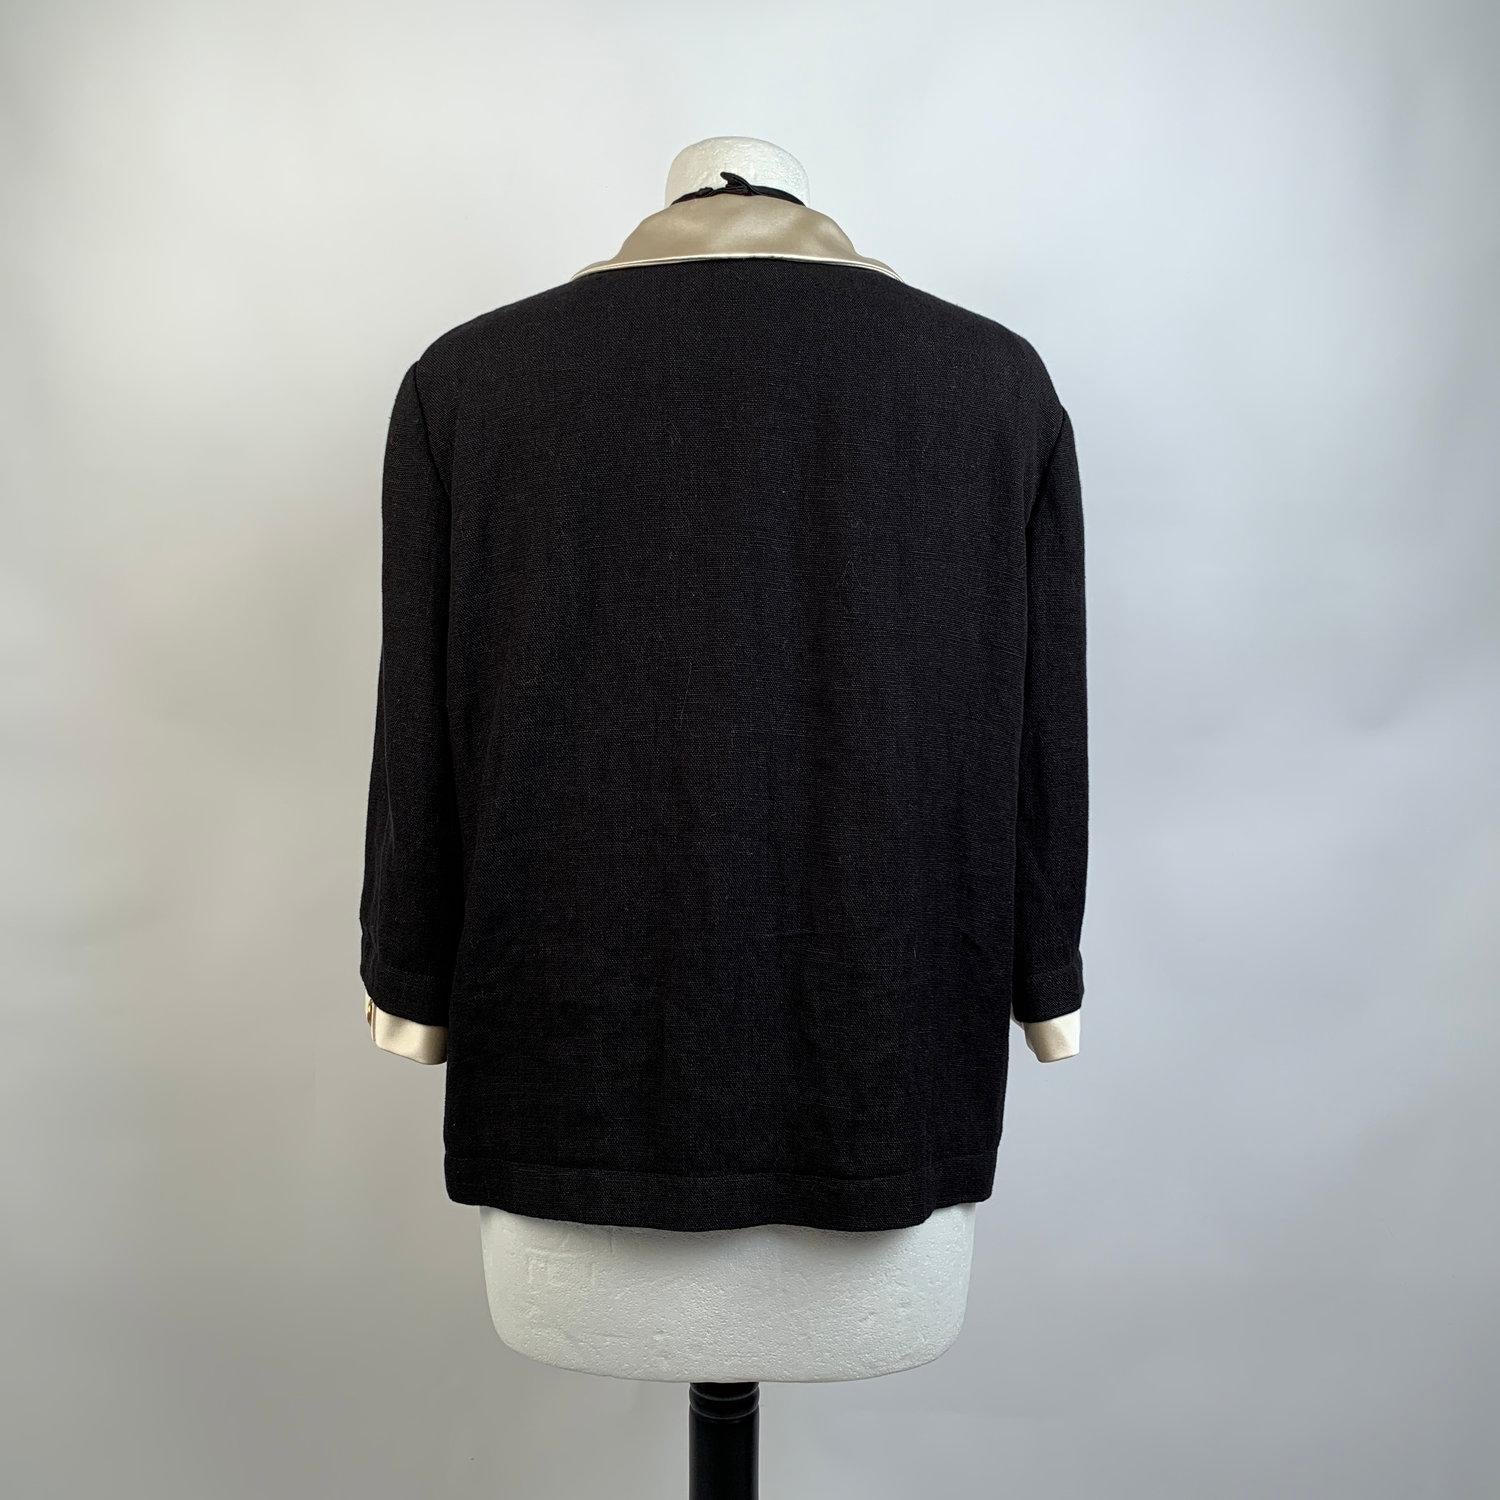 Women's Gucci Black Linen Jacket with Contrast Silk Collar Size 42